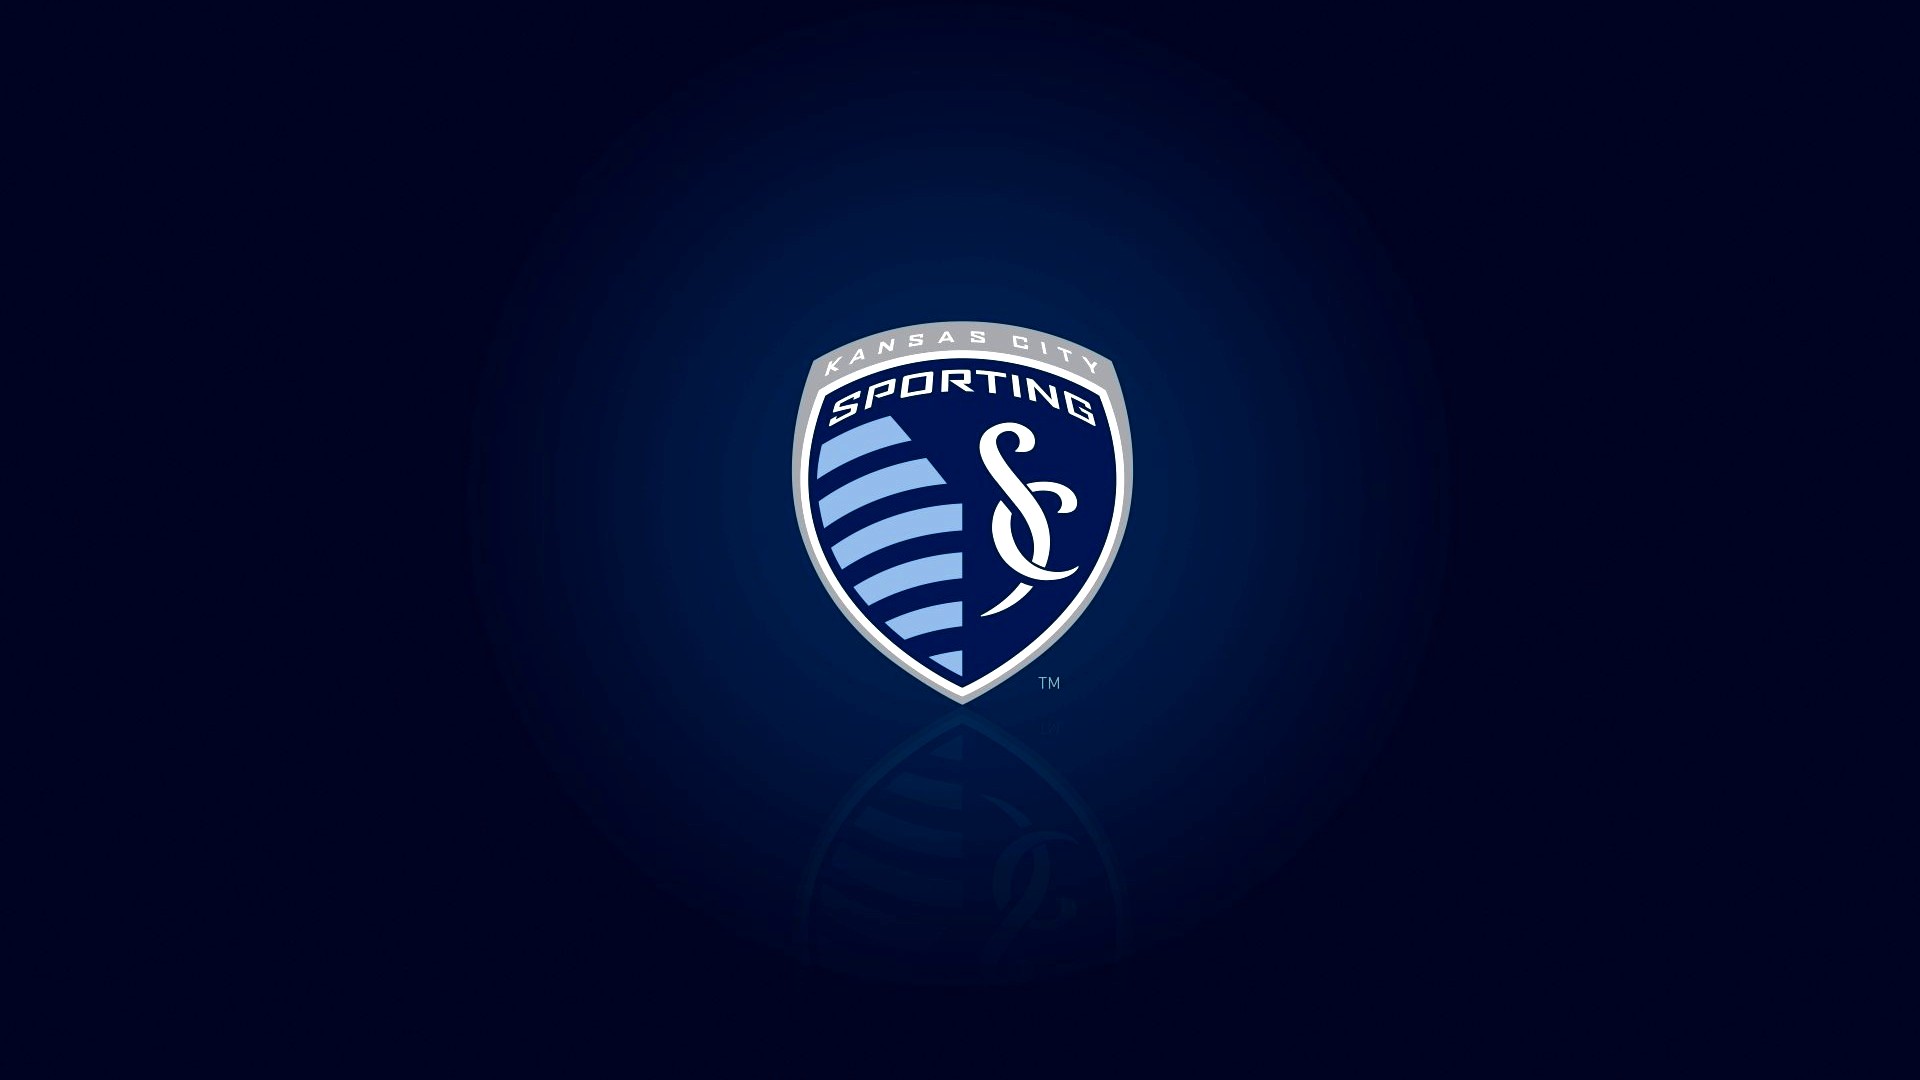 Wallpapers HD Sporting KC With high-resolution 1920X1080 pixel. You can use this wallpaper for your Desktop Computers, Mac Screensavers, Windows Backgrounds, iPhone Wallpapers, Tablet or Android Lock screen and another Mobile device